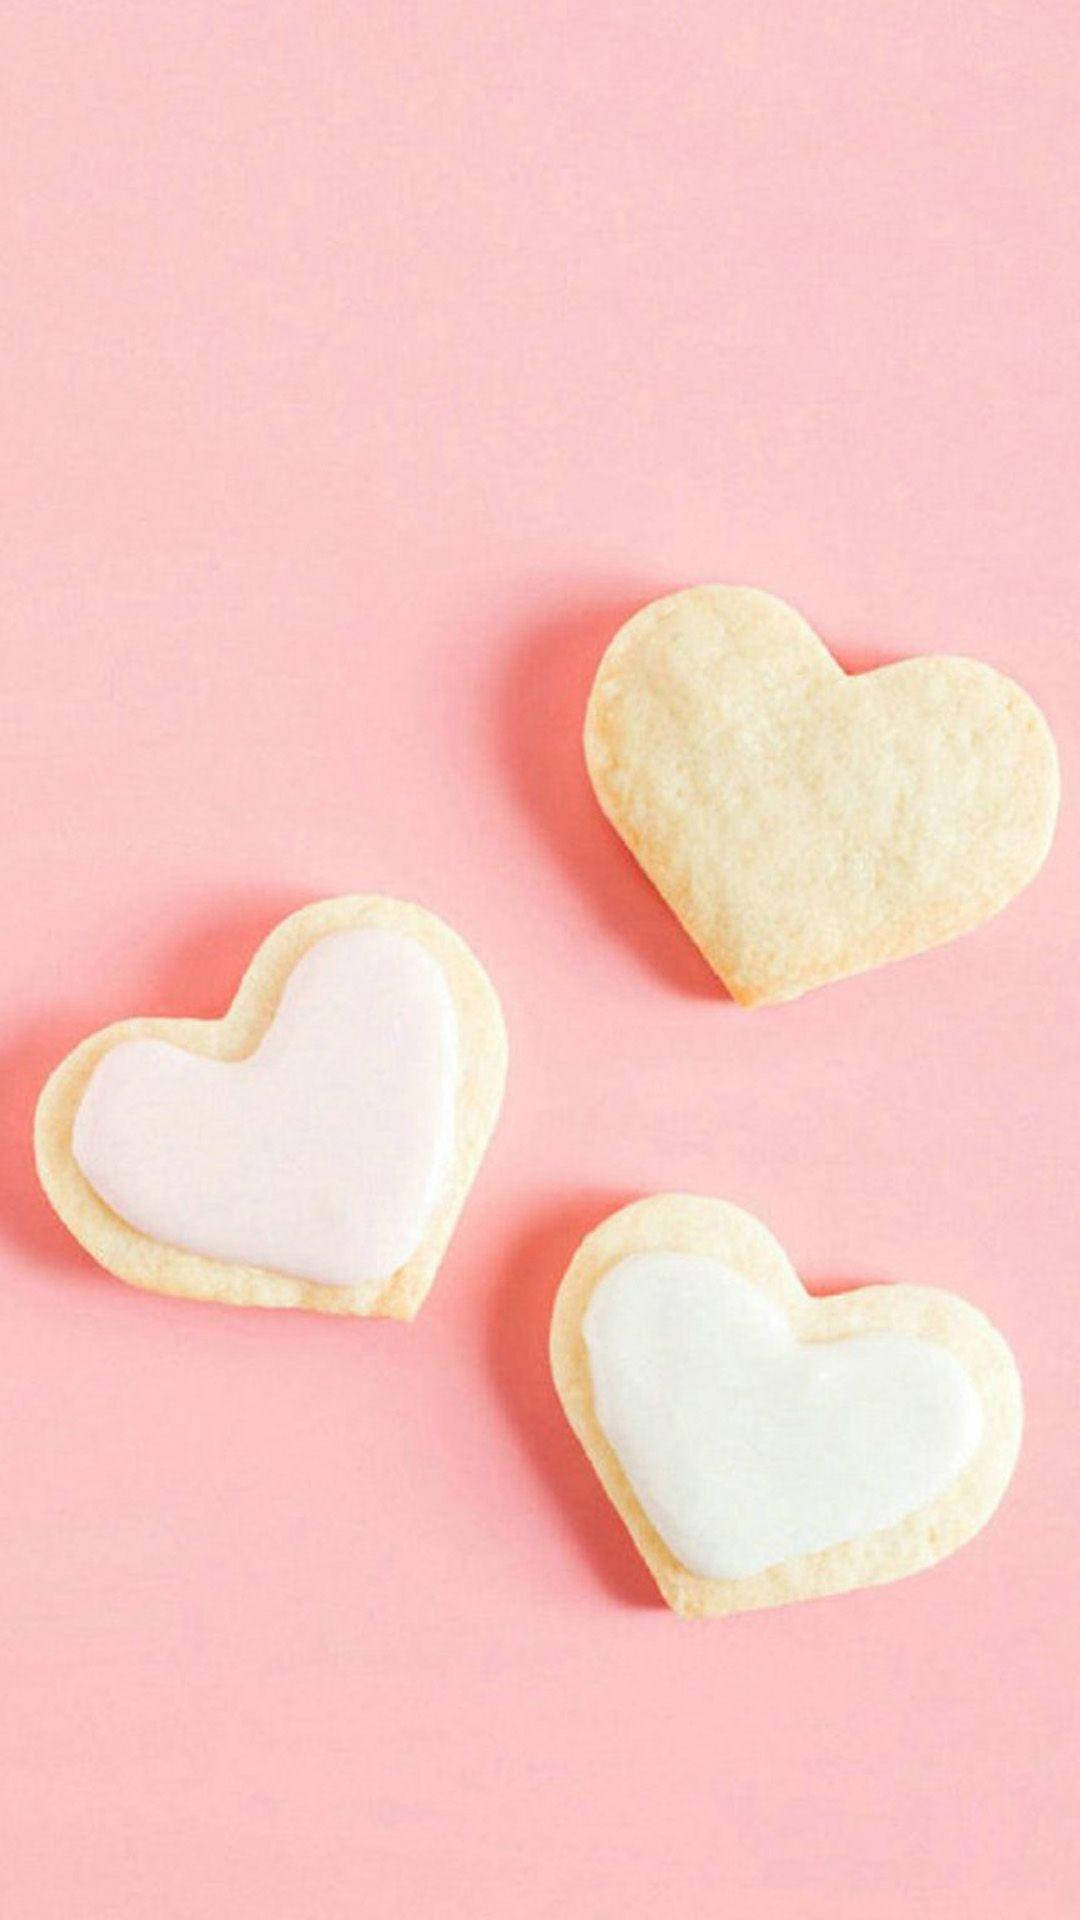 Adorable Heart-shaped Cookies With Filling Background